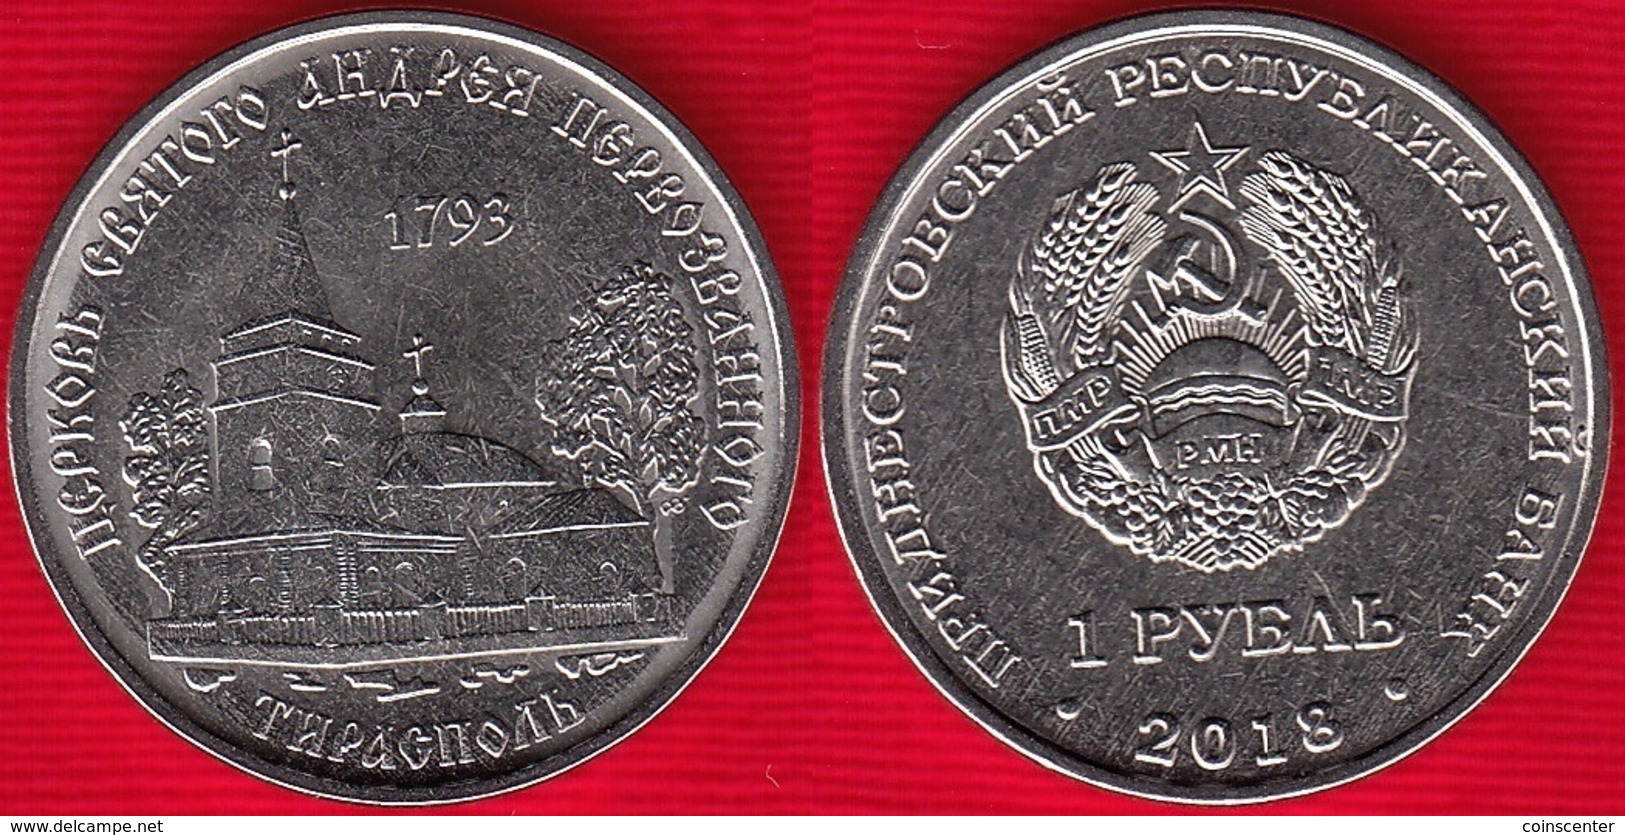 Transnistria 1 Rouble 2018 "Church Of St. Andrew The First-Called, Tiraspol" UNC - Moldova